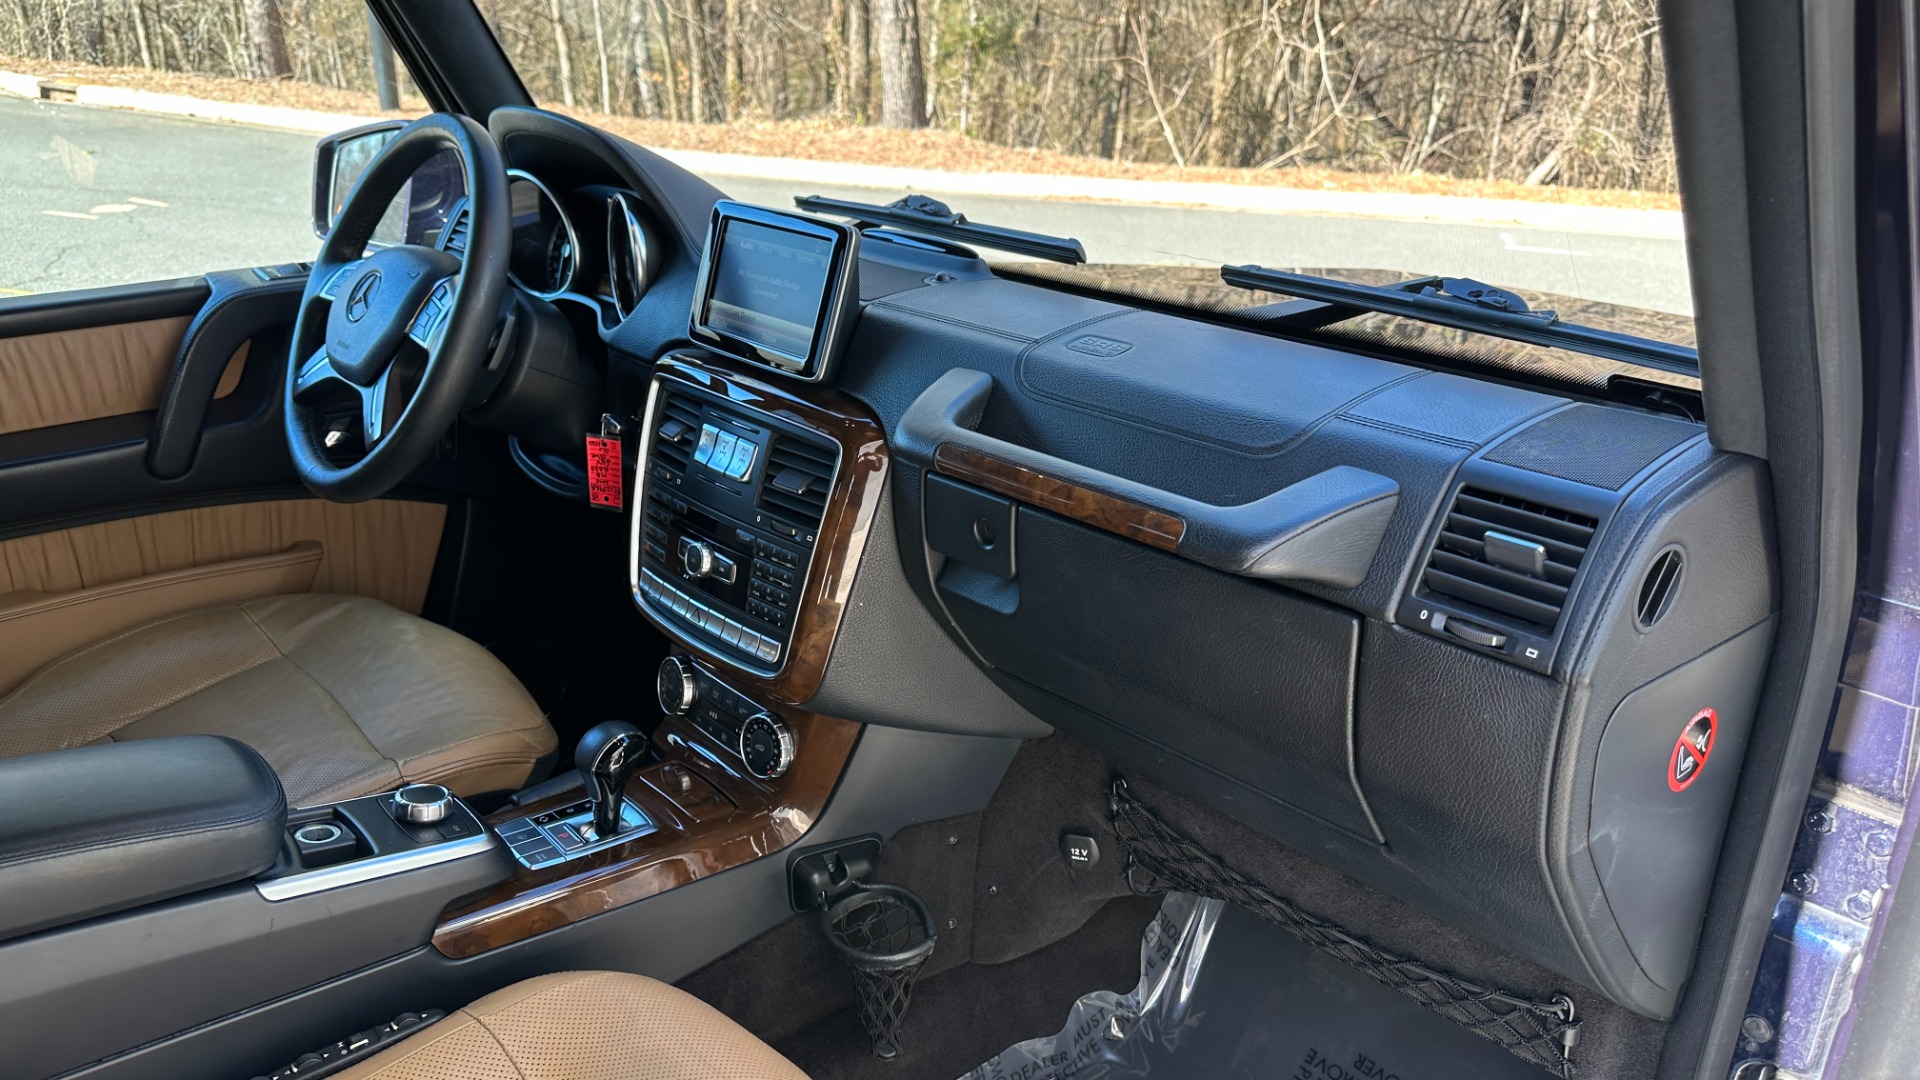 Used 2015 Mercedes-Benz G-Class G550 / DESIGNO NAPPA LEATHER / DESIGNO HEADLINER / HEATED STEERING / NAV /  for sale Sold at Formula Imports in Charlotte NC 28227 28